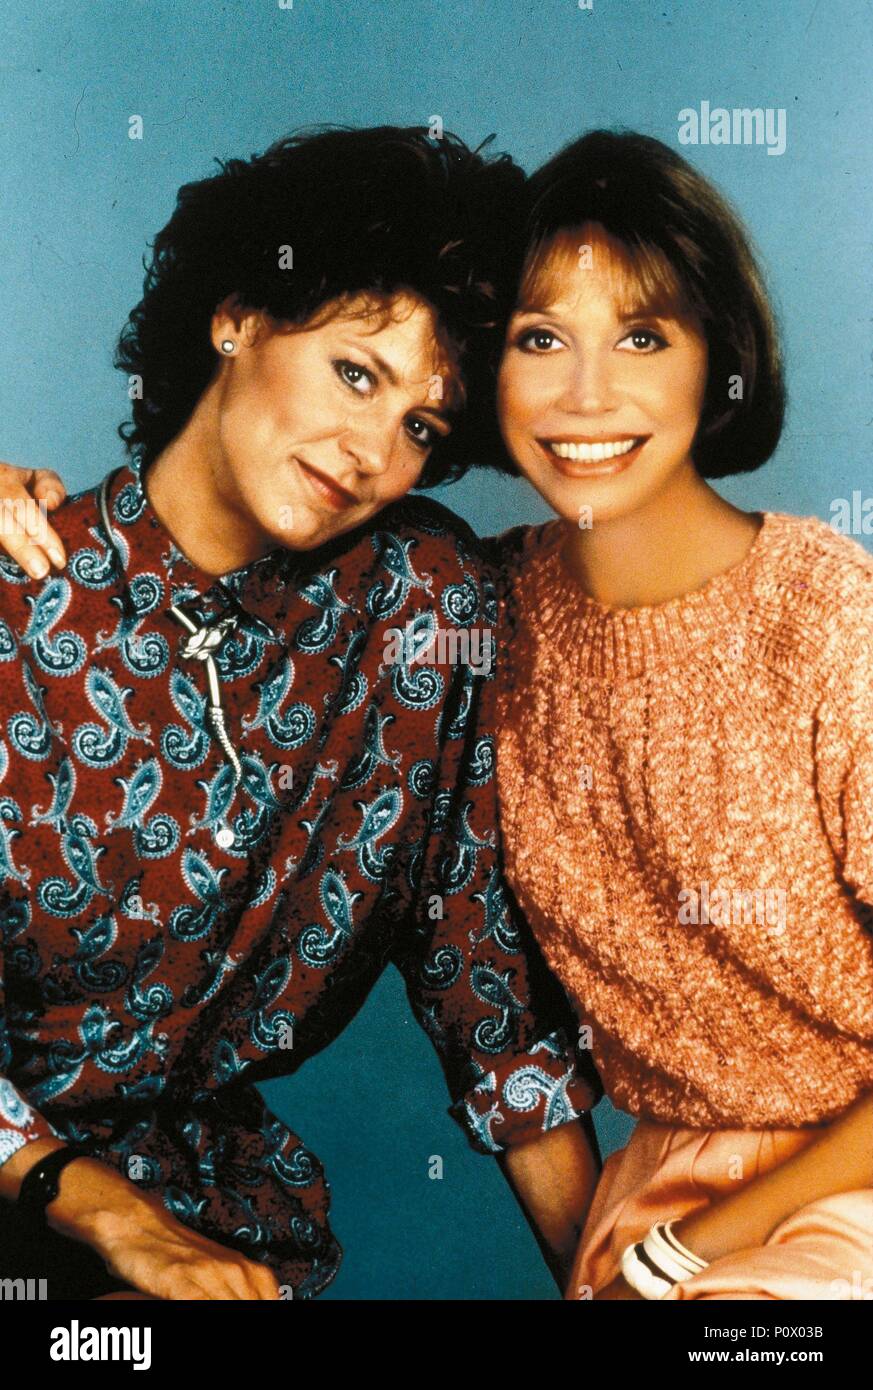 Original Film Title: JUST BETWEEN FRIENDS.  English Title: JUST BETWEEN FRIENDS.  Film Director: ALLAN BURNS.  Year: 1986.  Stars: CHRISTINE LAHTI; MARY TYLER MOORE. Credit: ORION PICTURES / Album Stock Photo